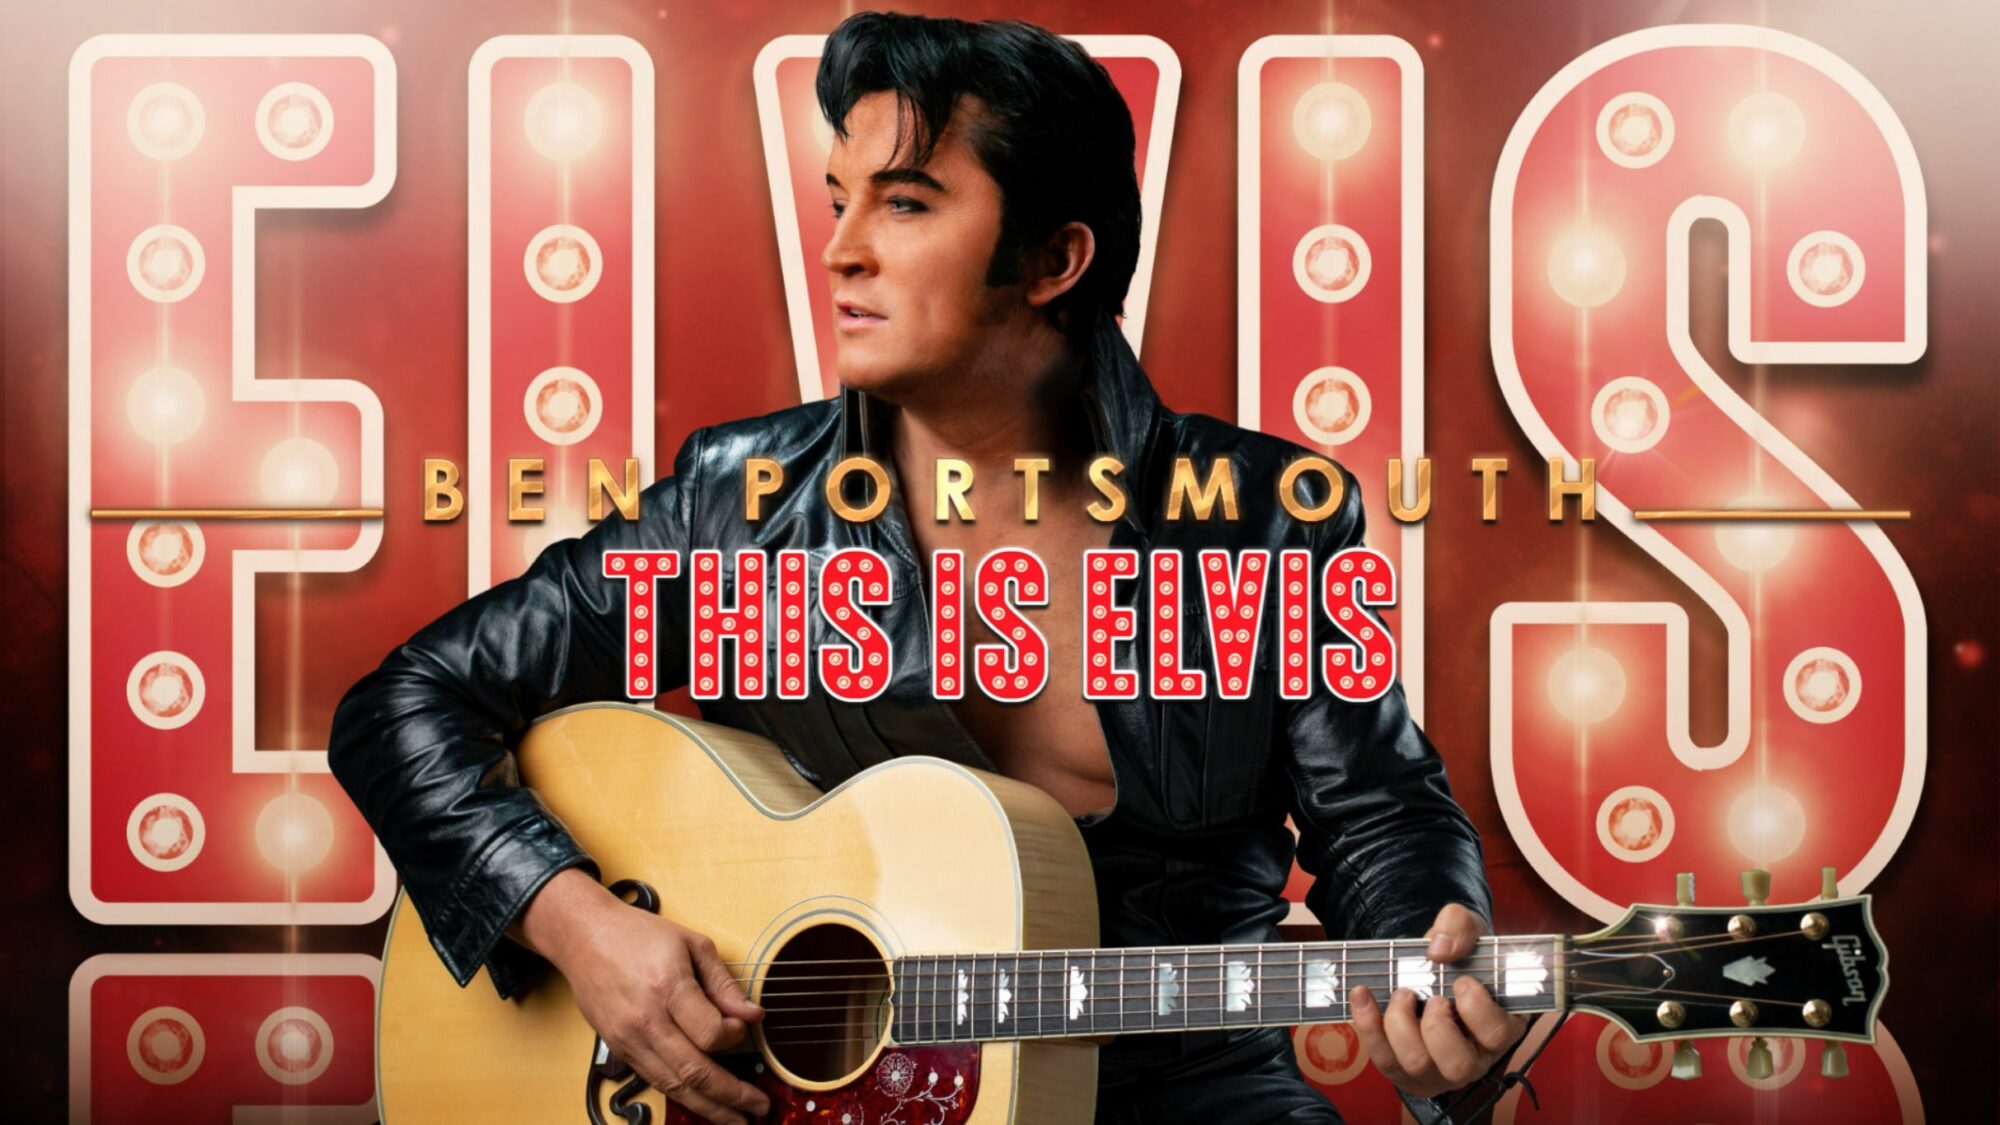 Image name Ben Portsmouth This Is Elvis at York Barbican York the 1 image from the post Ben Portsmouth - This Is Elvis at York Barbican, York in Yorkshire.com.